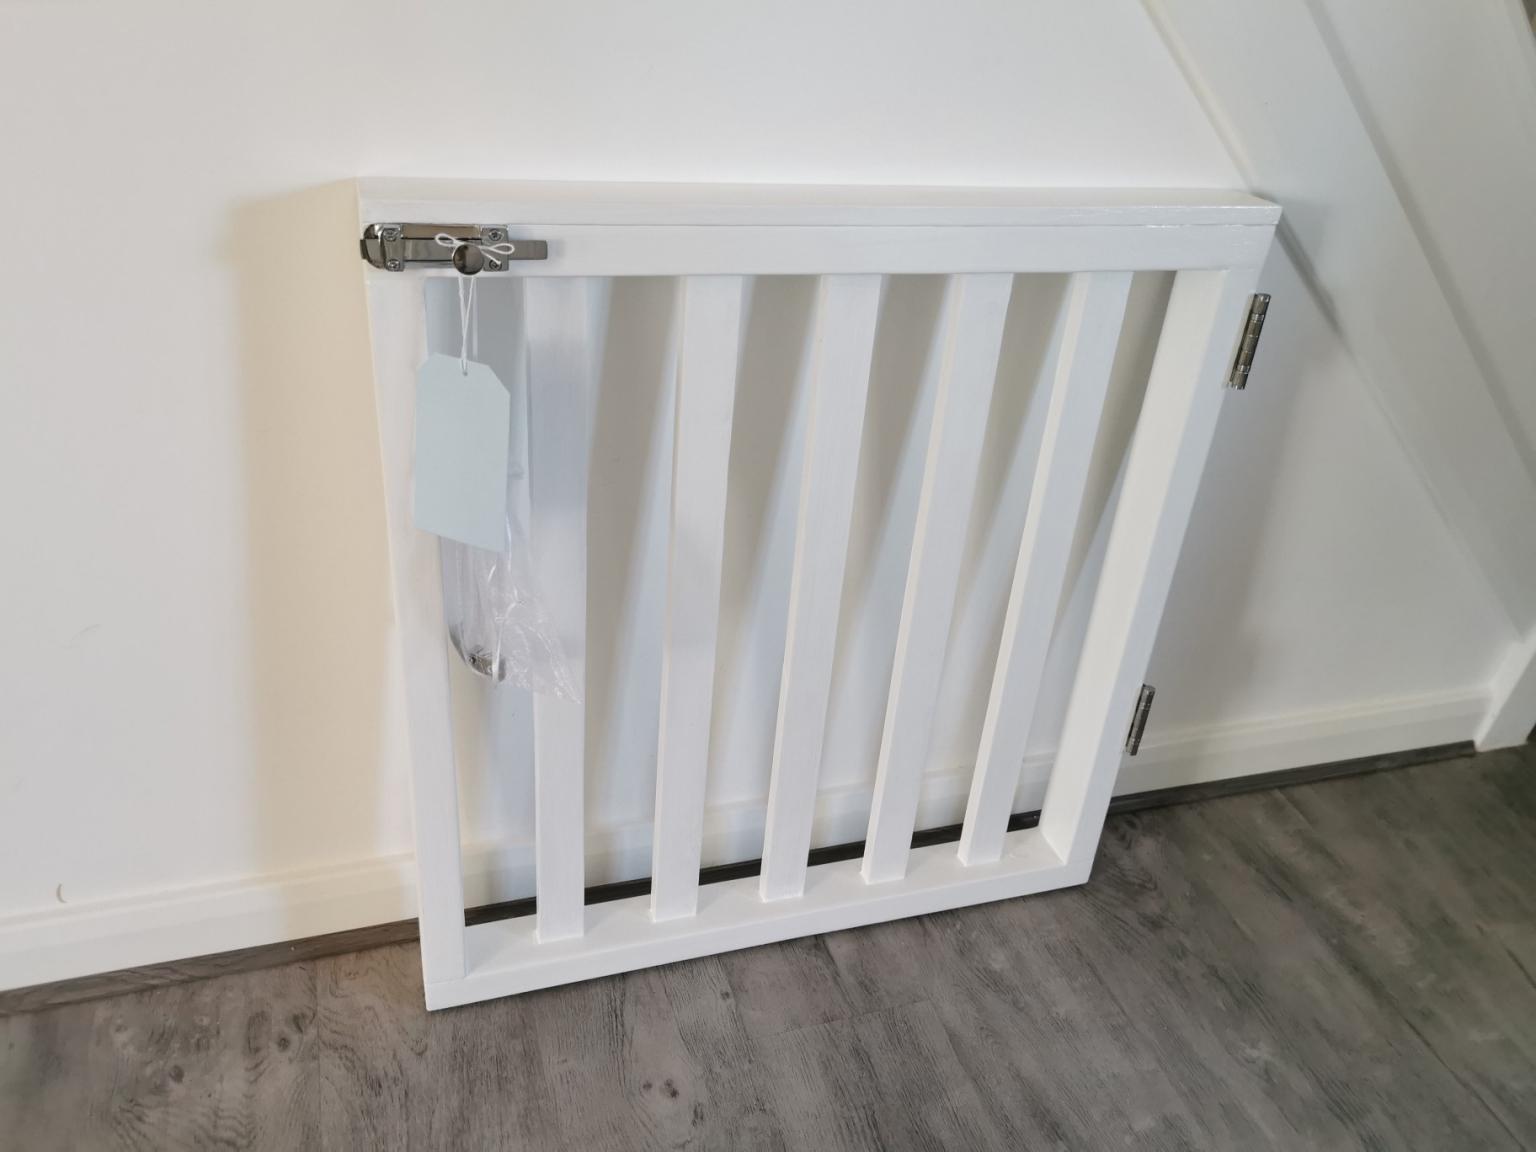 Bespoke Wooden Baby Gate In Selby For, White Wooden Baby Gates For Stairs